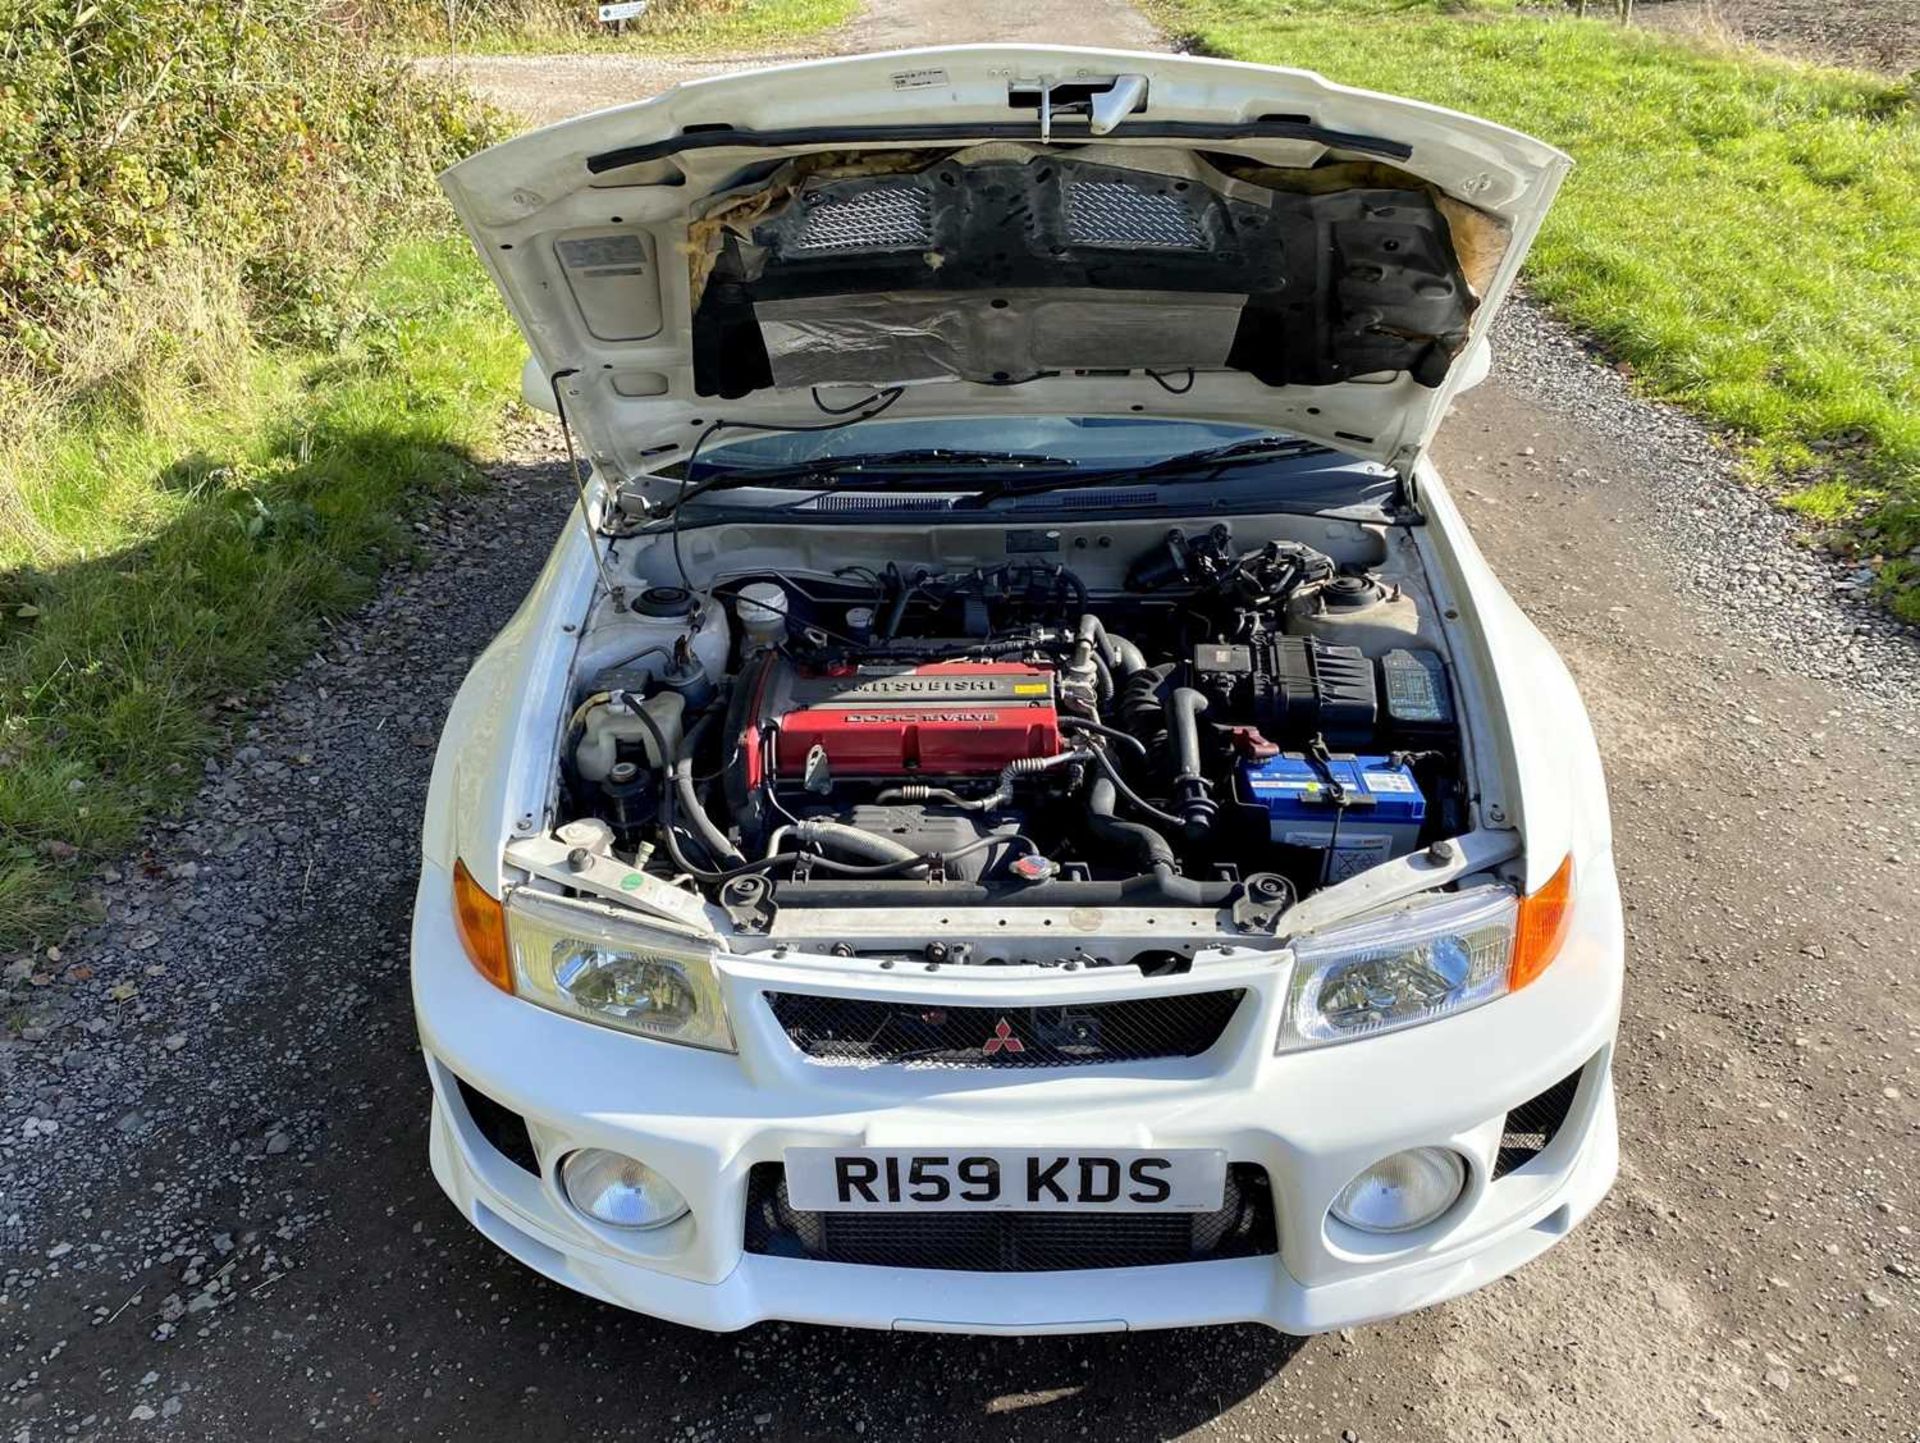 1998 Mitsubishi Lancer Evolution V GSR One UK keeper since being imported two years ago - Image 14 of 100